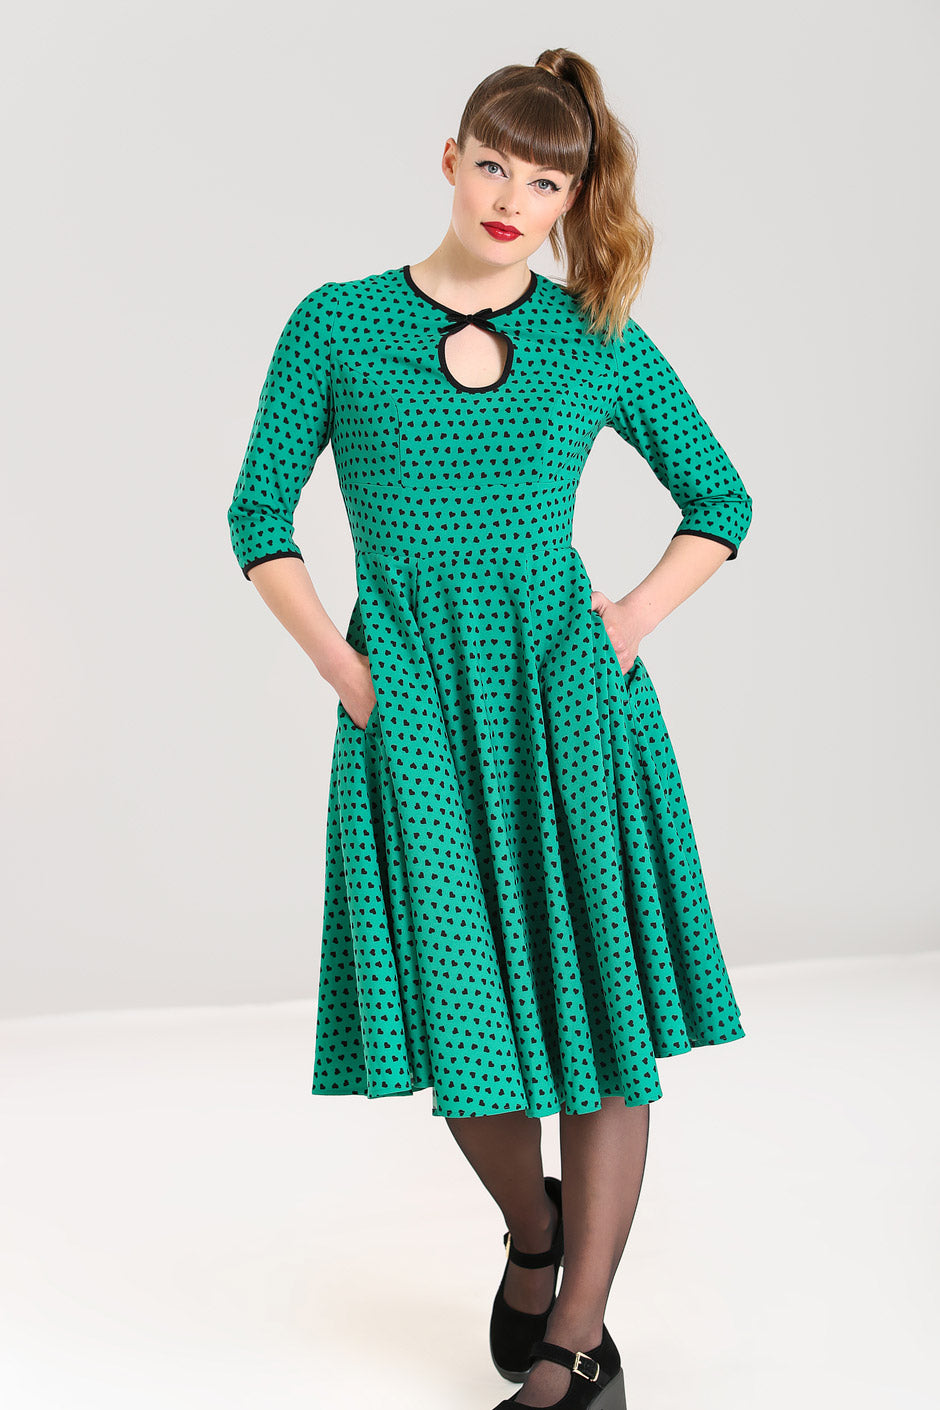 Hell Bunny Paradisum 50's Dress green retro vintage swing dress with black hearts and three quarter length sleeves pinup rockabilly Suzie's Bombshell Boutique